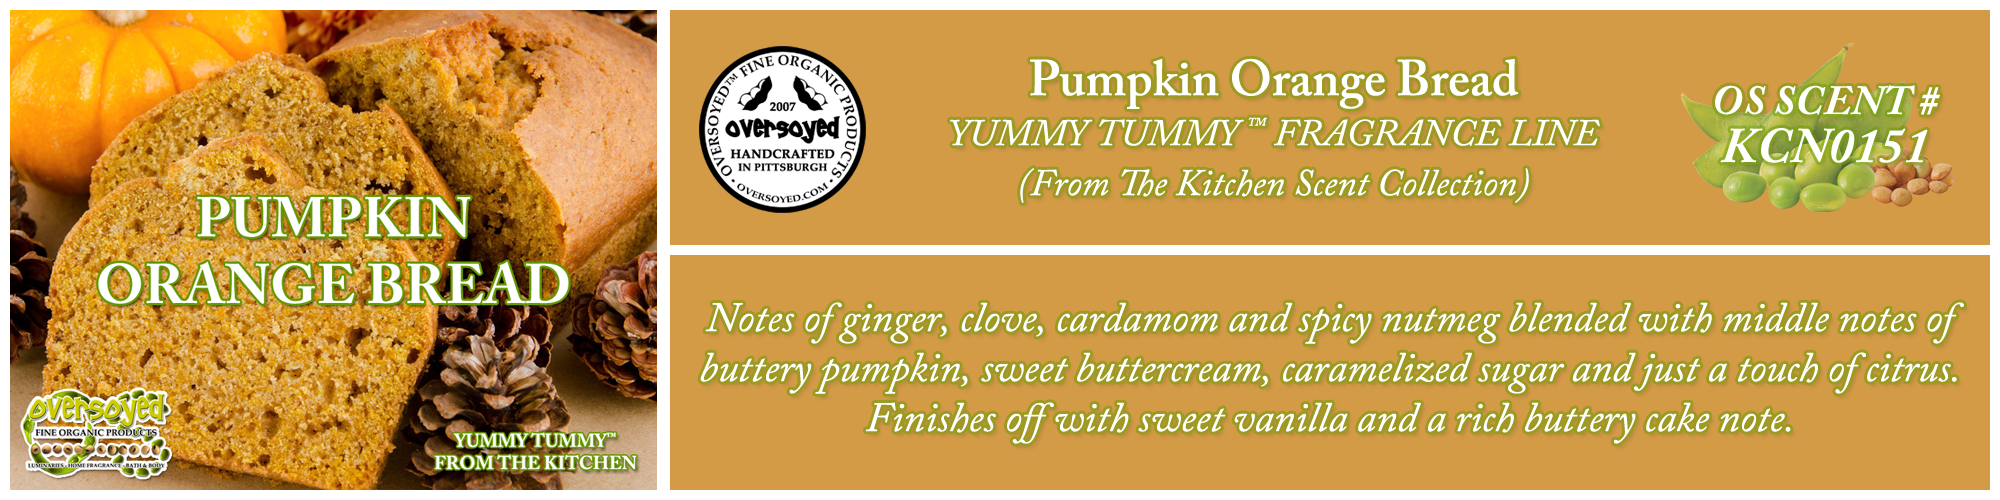 Pumpkin Orange Bread Handcrafted Products Collection